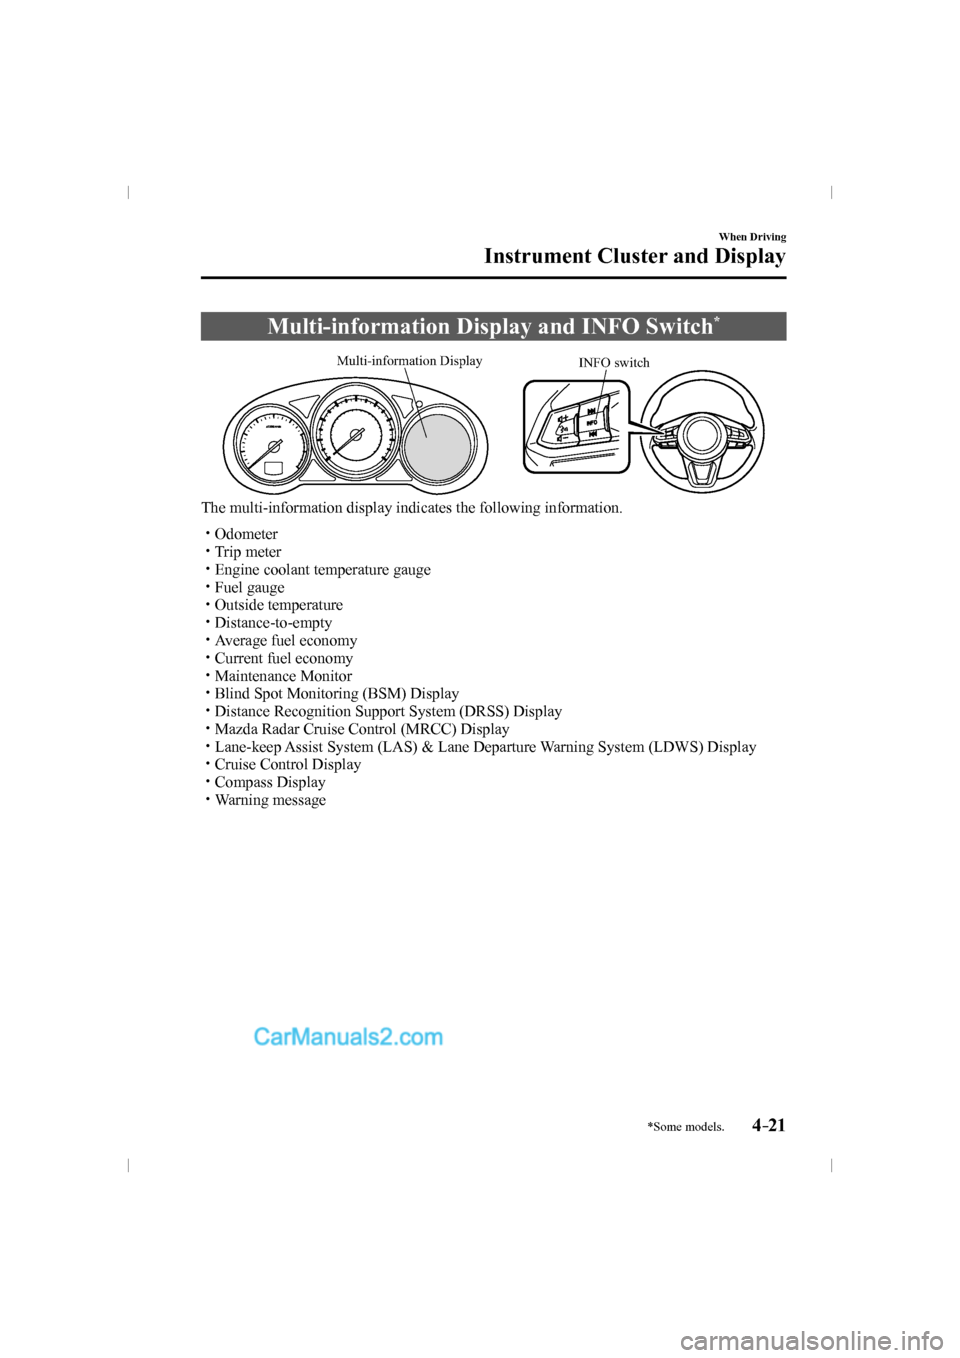 MAZDA MODEL CX-9 2016  Owners Manual (in English) 4–21
When Driving
Instrument Cluster and Display
*Some models.
 Multi-information Display and INFO Switch * 
             
INFO switch Multi-information Display
 
The multi-information display indic